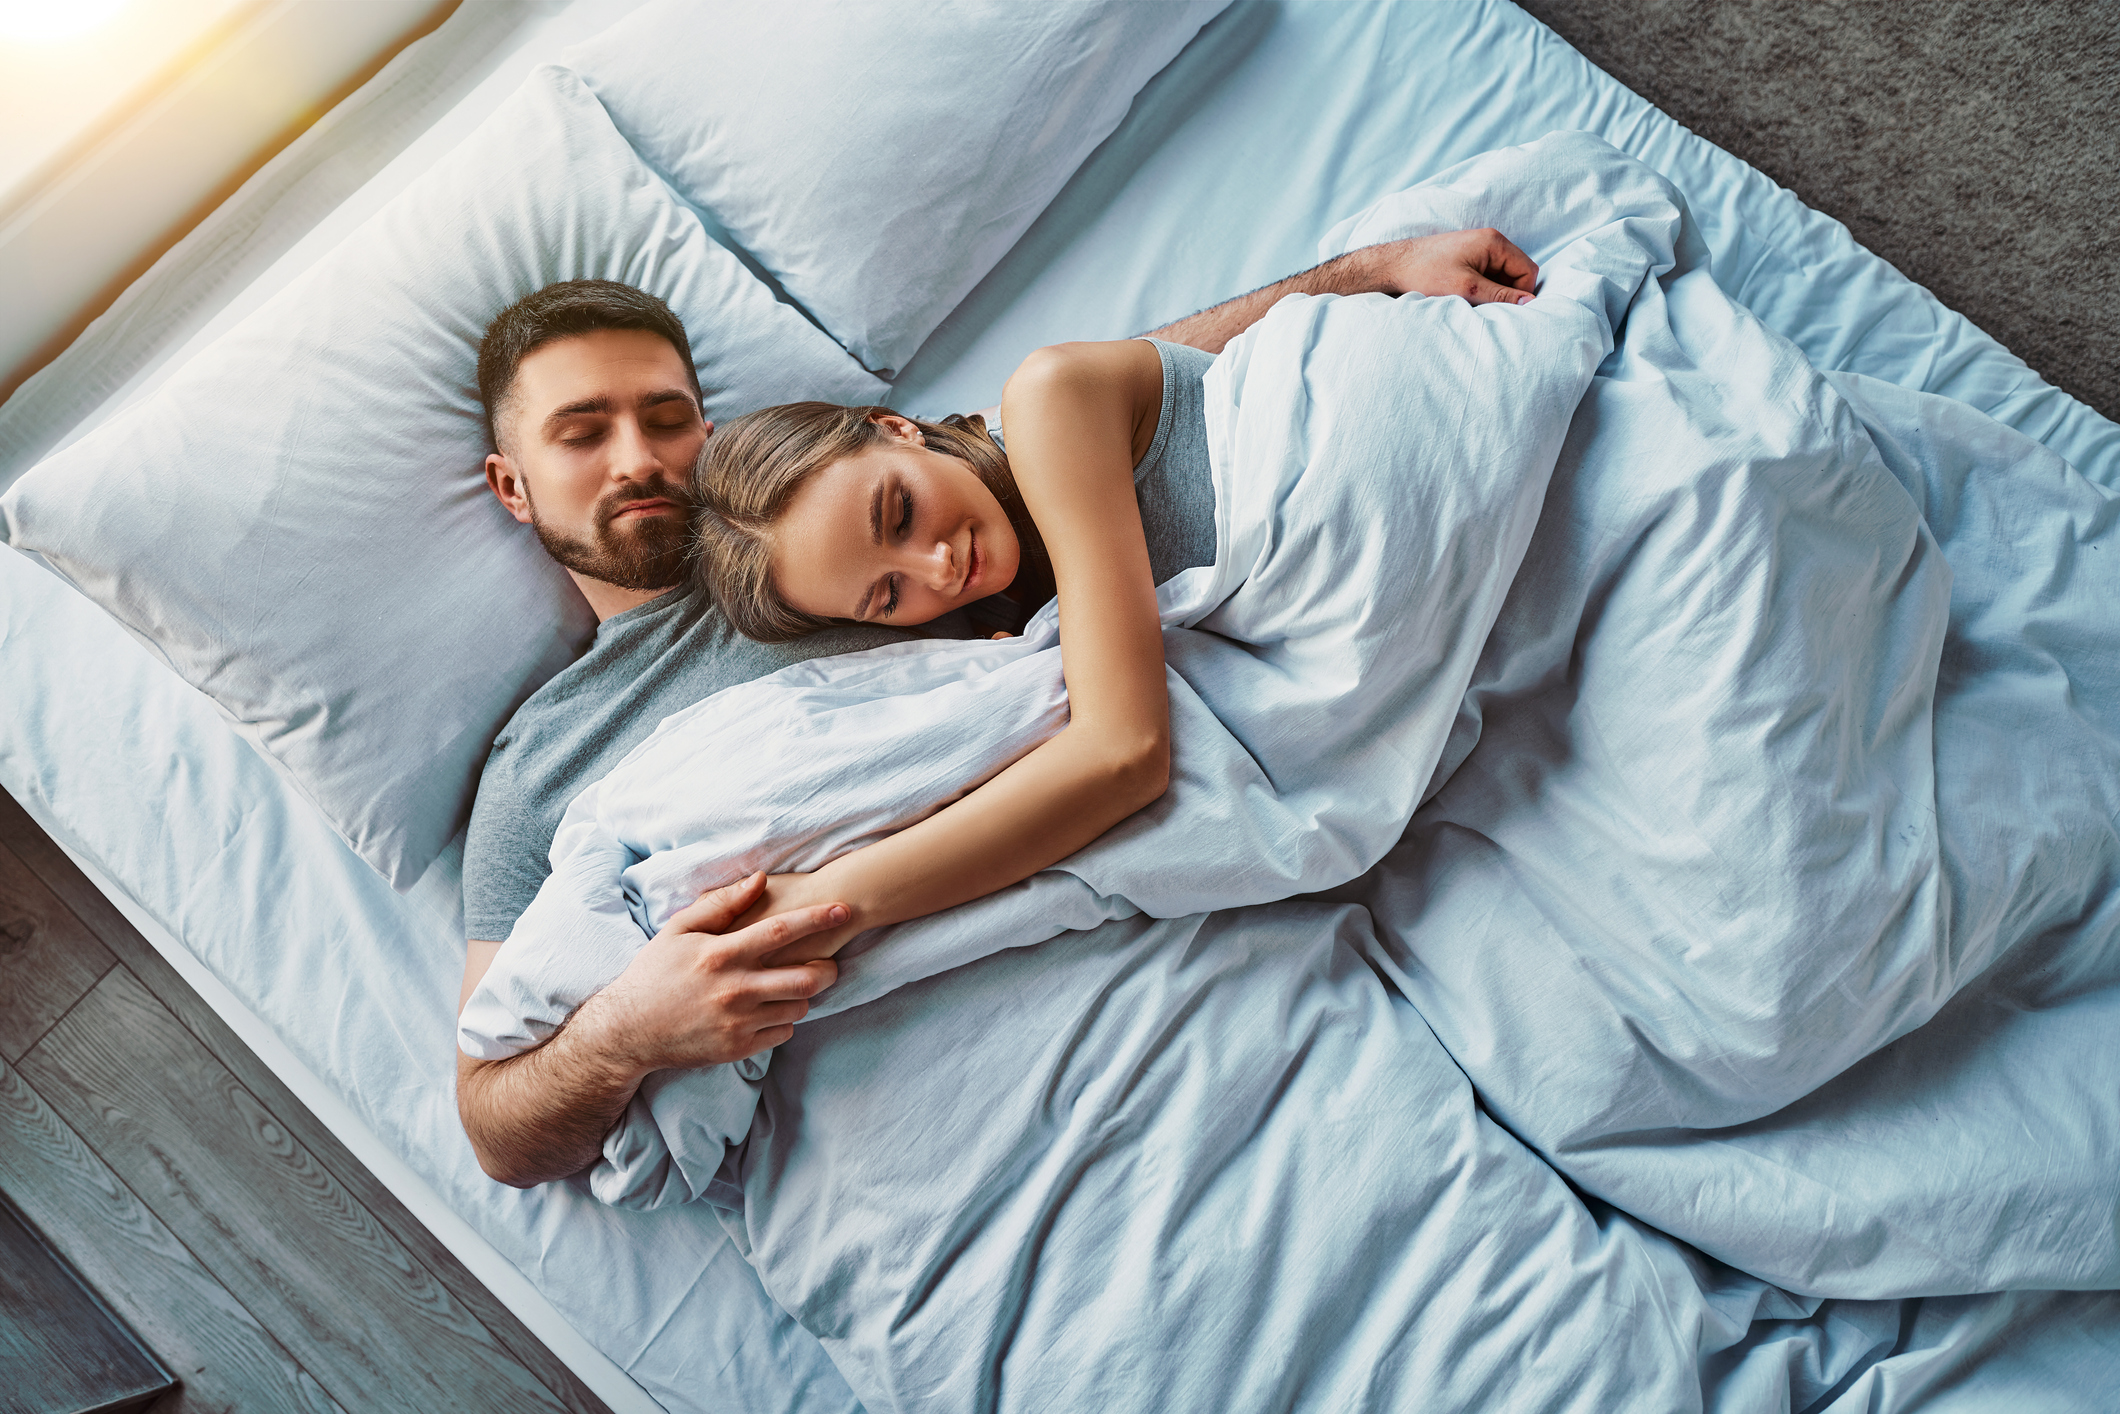 Should You Share a Bed With Your Partner? Sleep Scientists Break